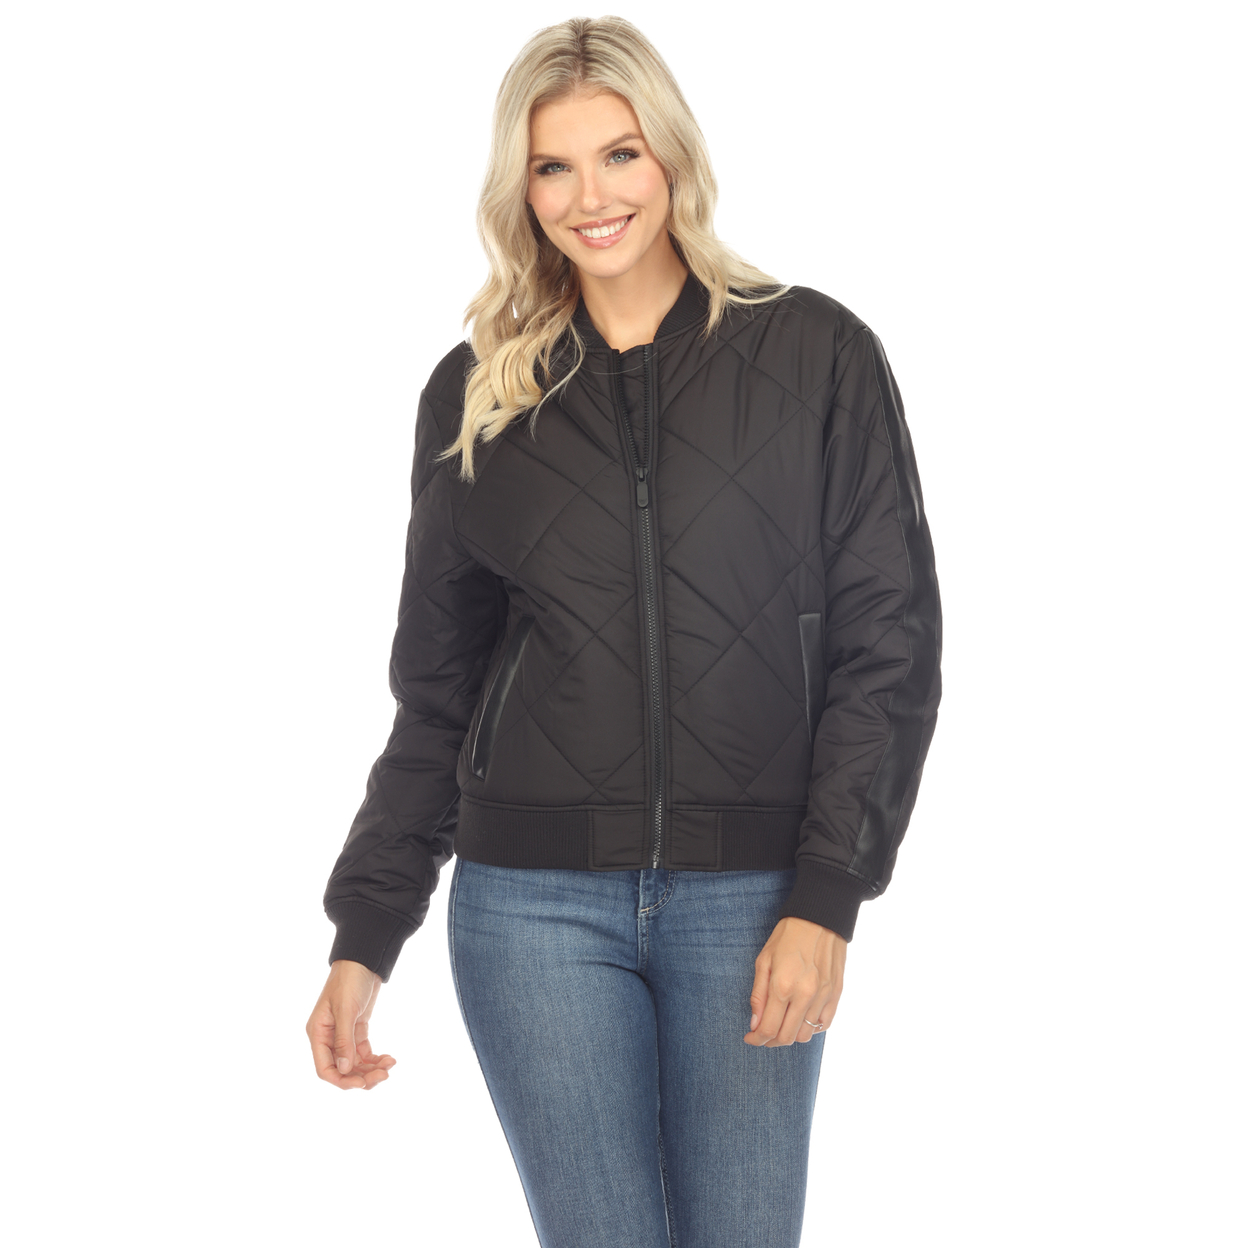 White Mark Women's Quilted Puffer Bomber Jacket - Black, Large